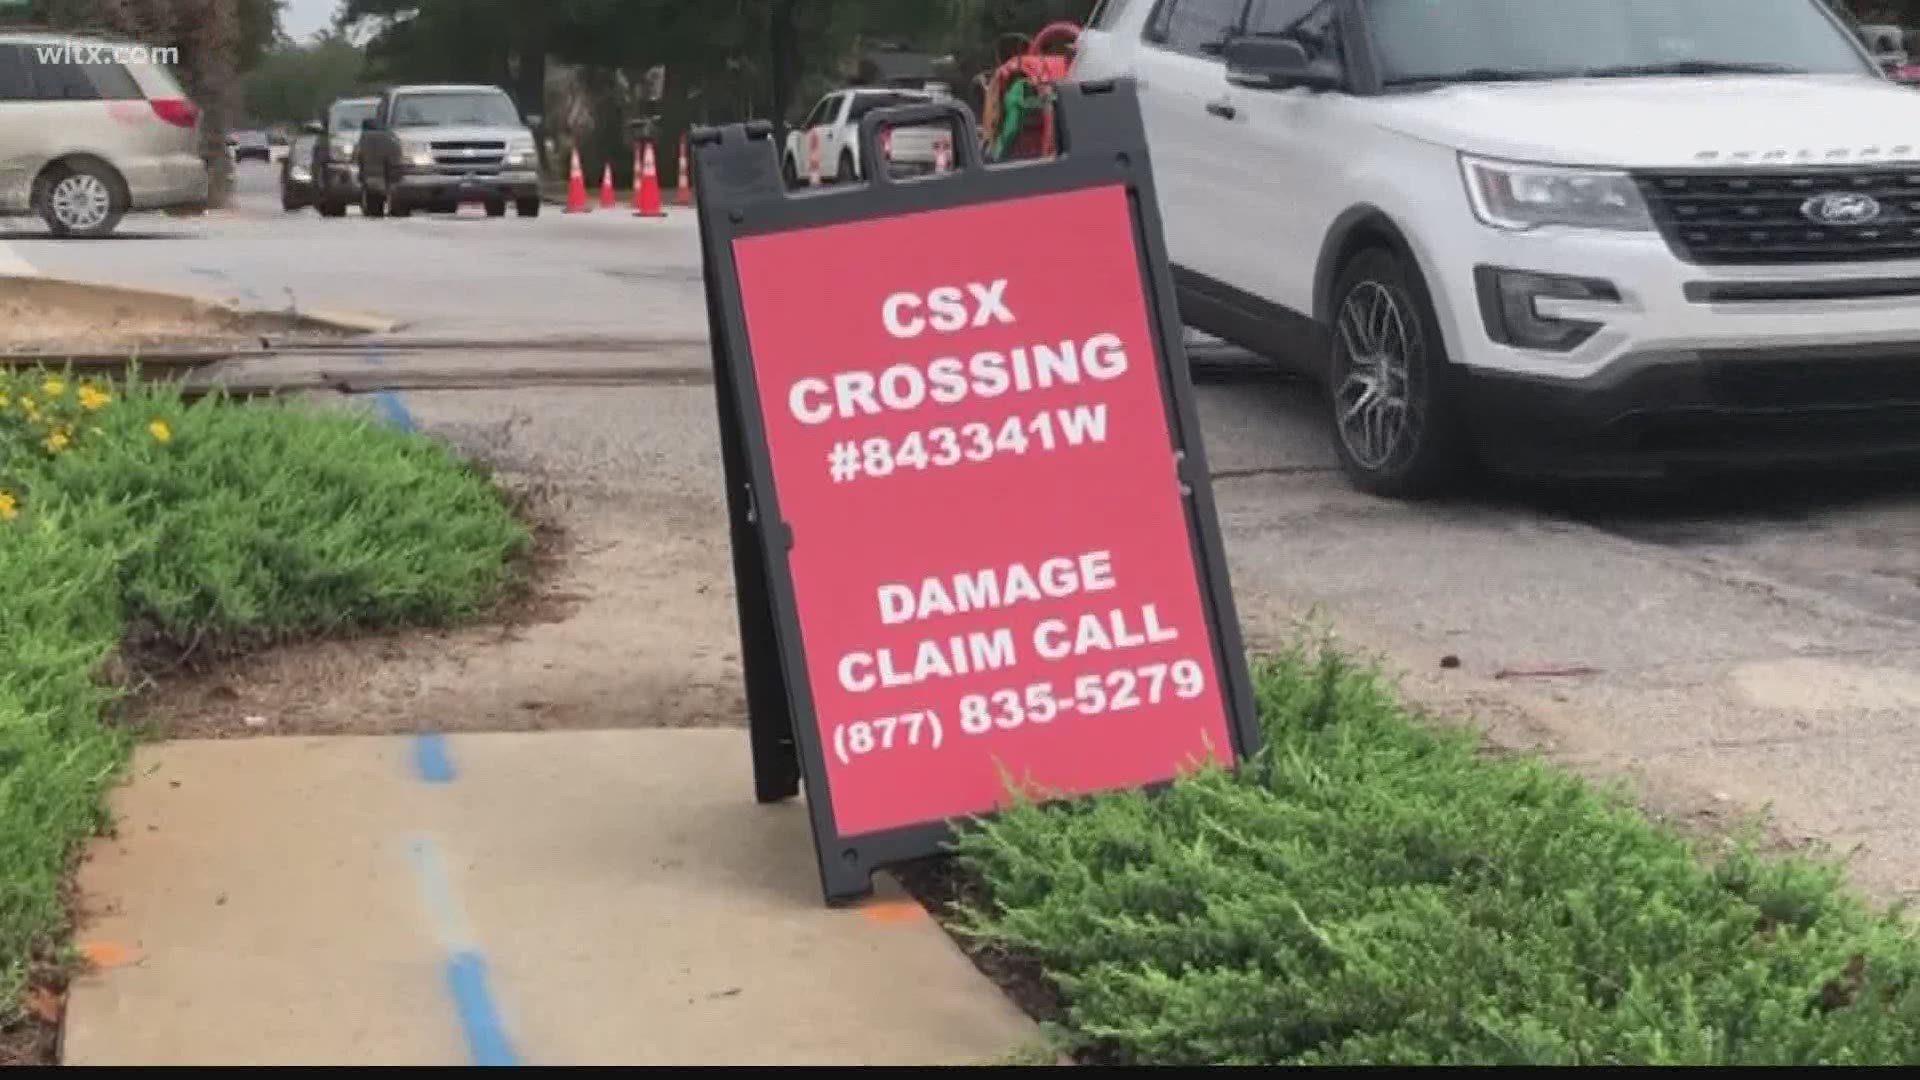 Residents of Irmo are putting out a sign to get CSX to help fix their railroad crossing.